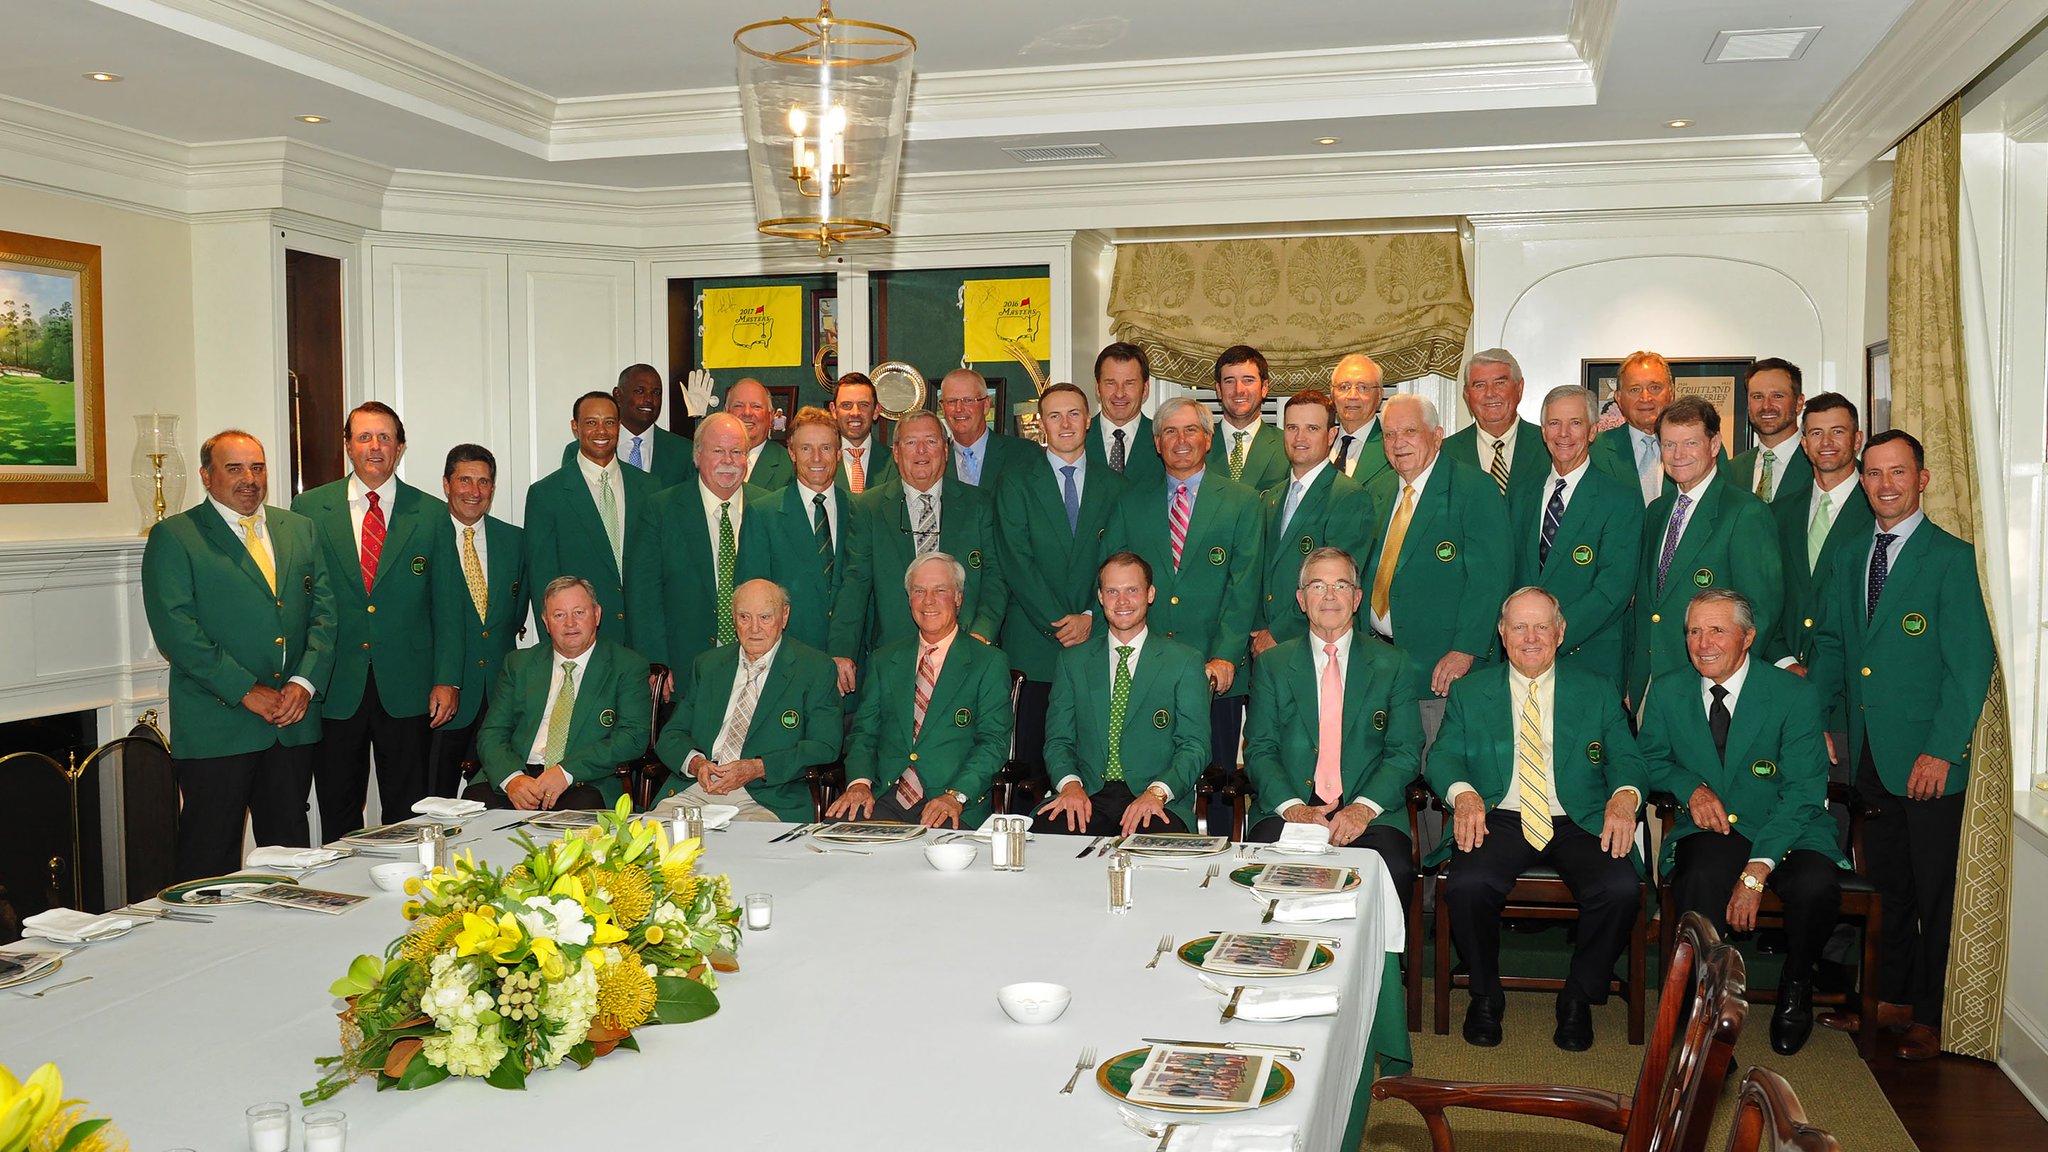 Masters Tournament on Twitter "The 2017 Champions Dinner portrait. 